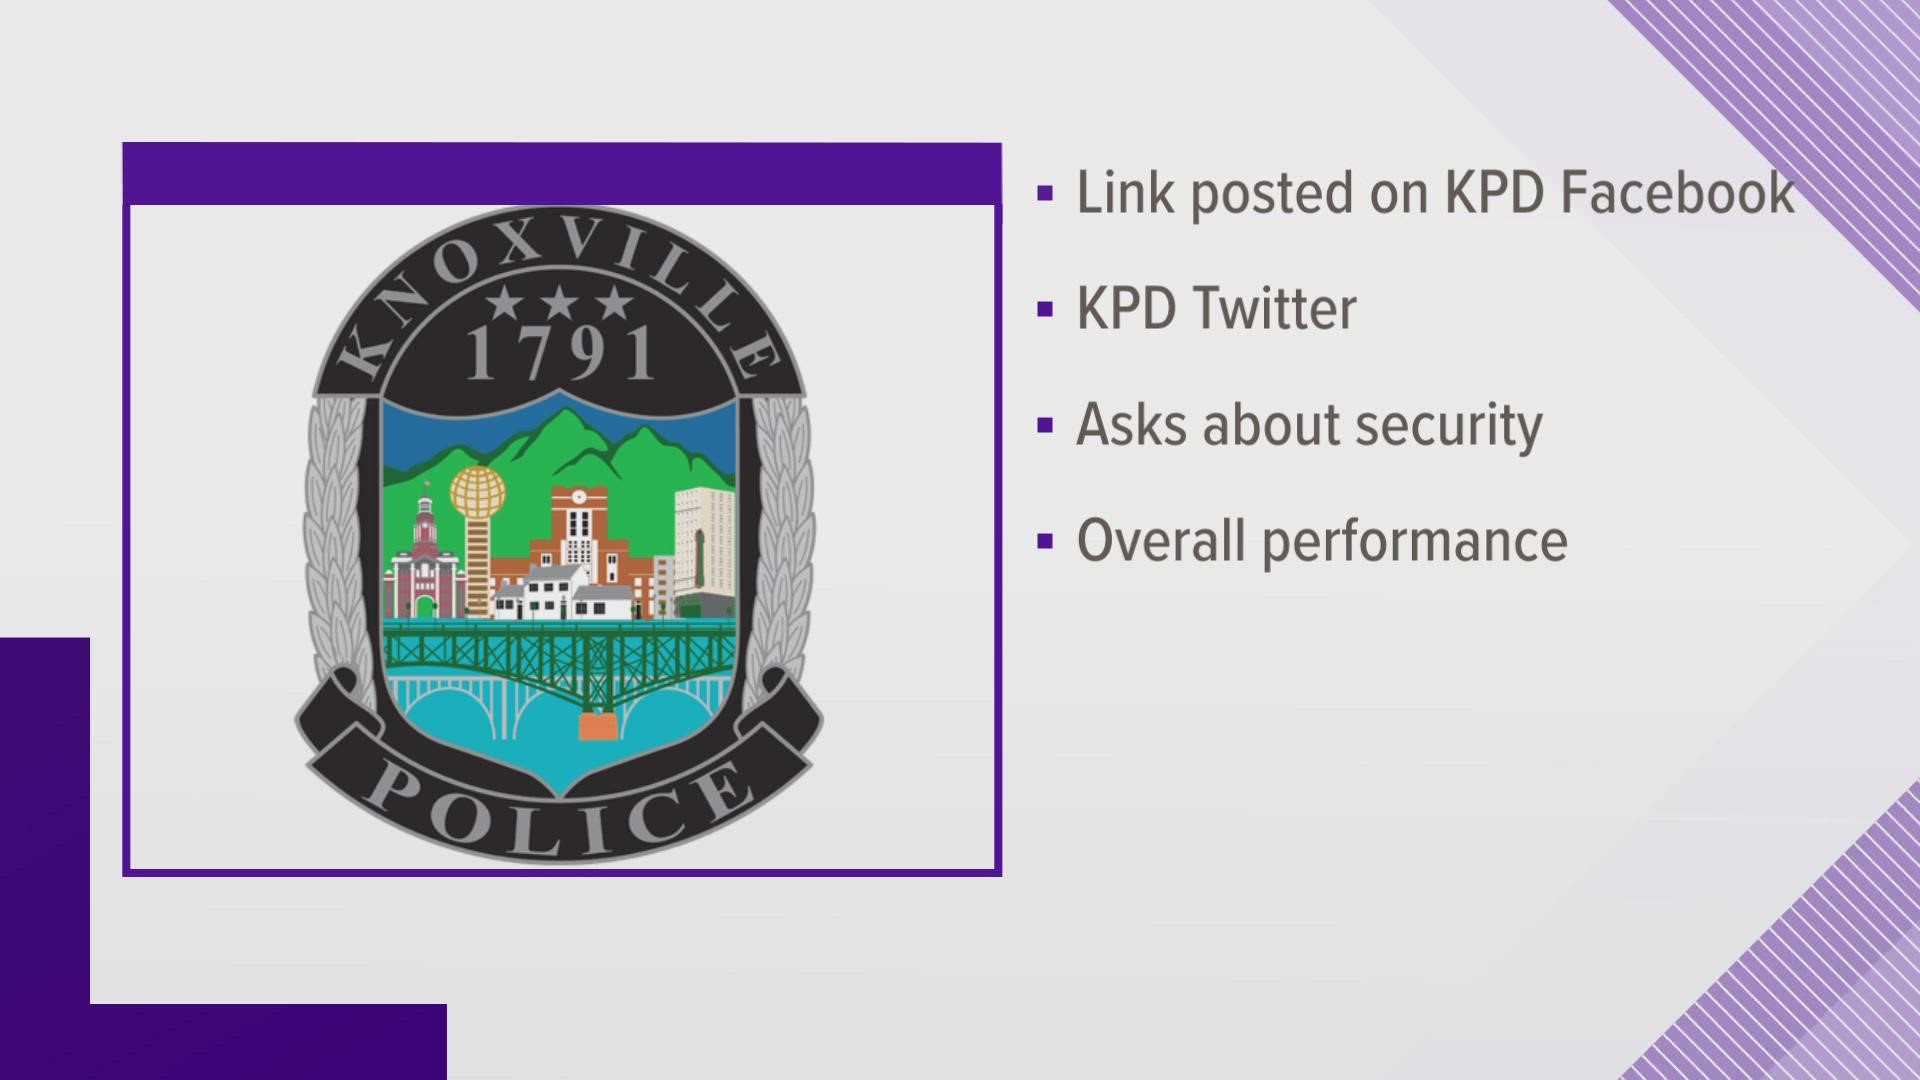 The Knoxville Police Department shared a survey on social media, hoping to collect feedback from the community.